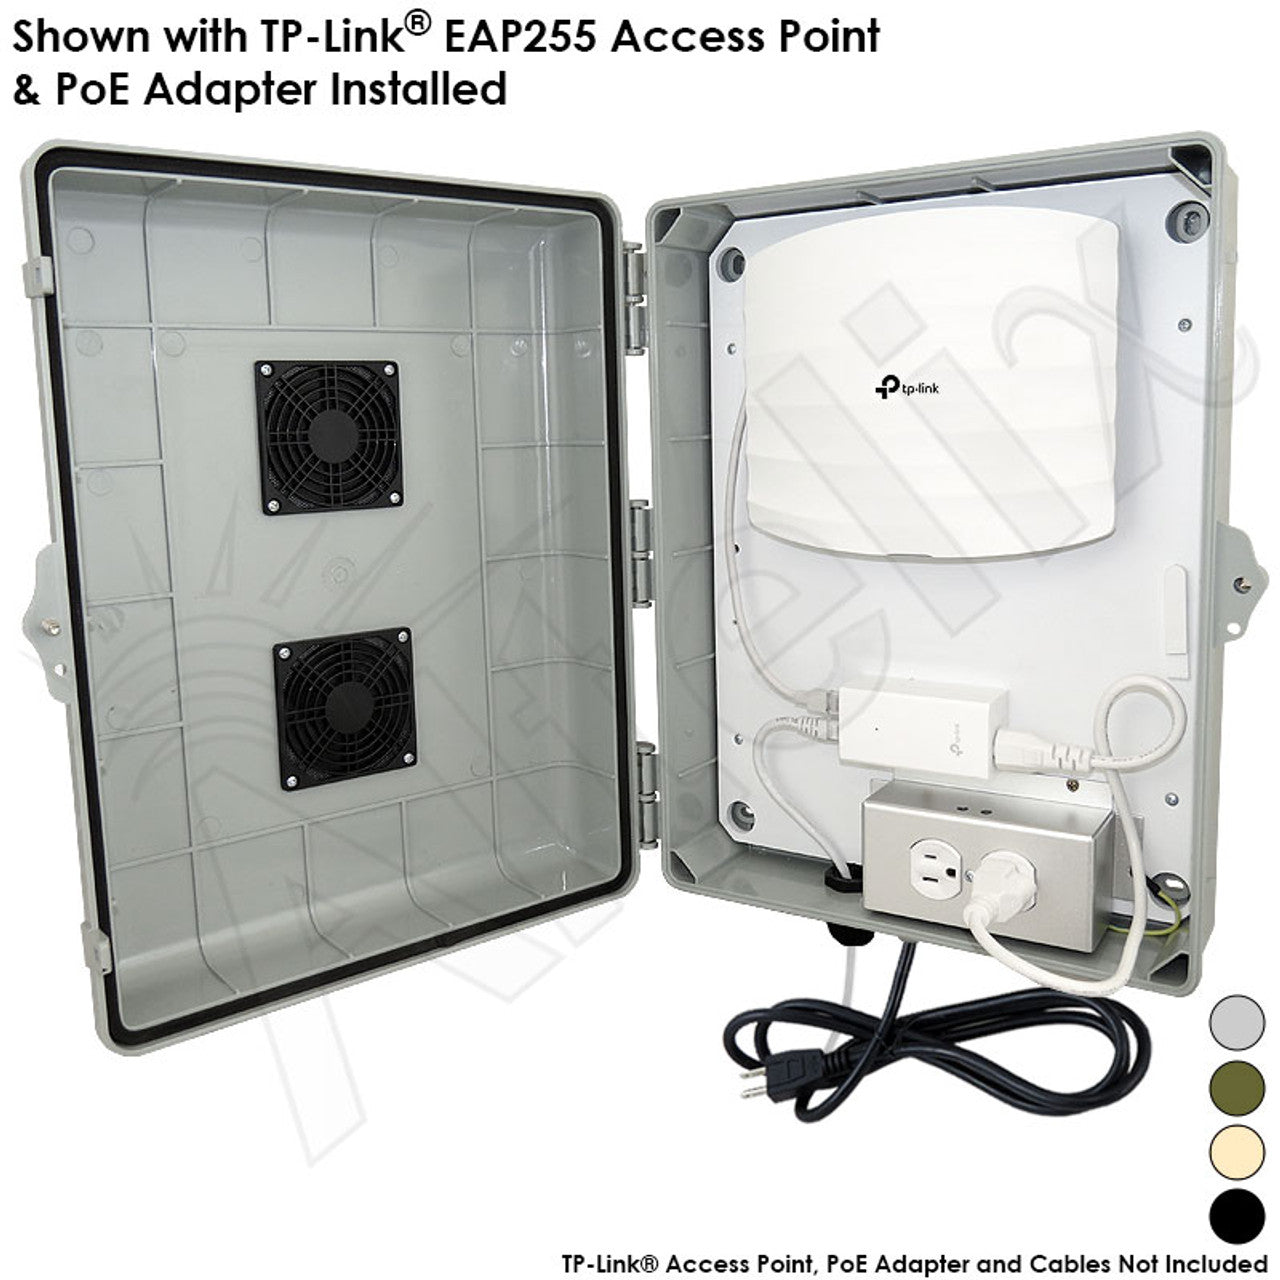 Altelix Vented Weatherproof Enclosure for TP-Link¬Æ AC1350 EAP225 V3 Access Point with 120VAC Outlets and Power Cord